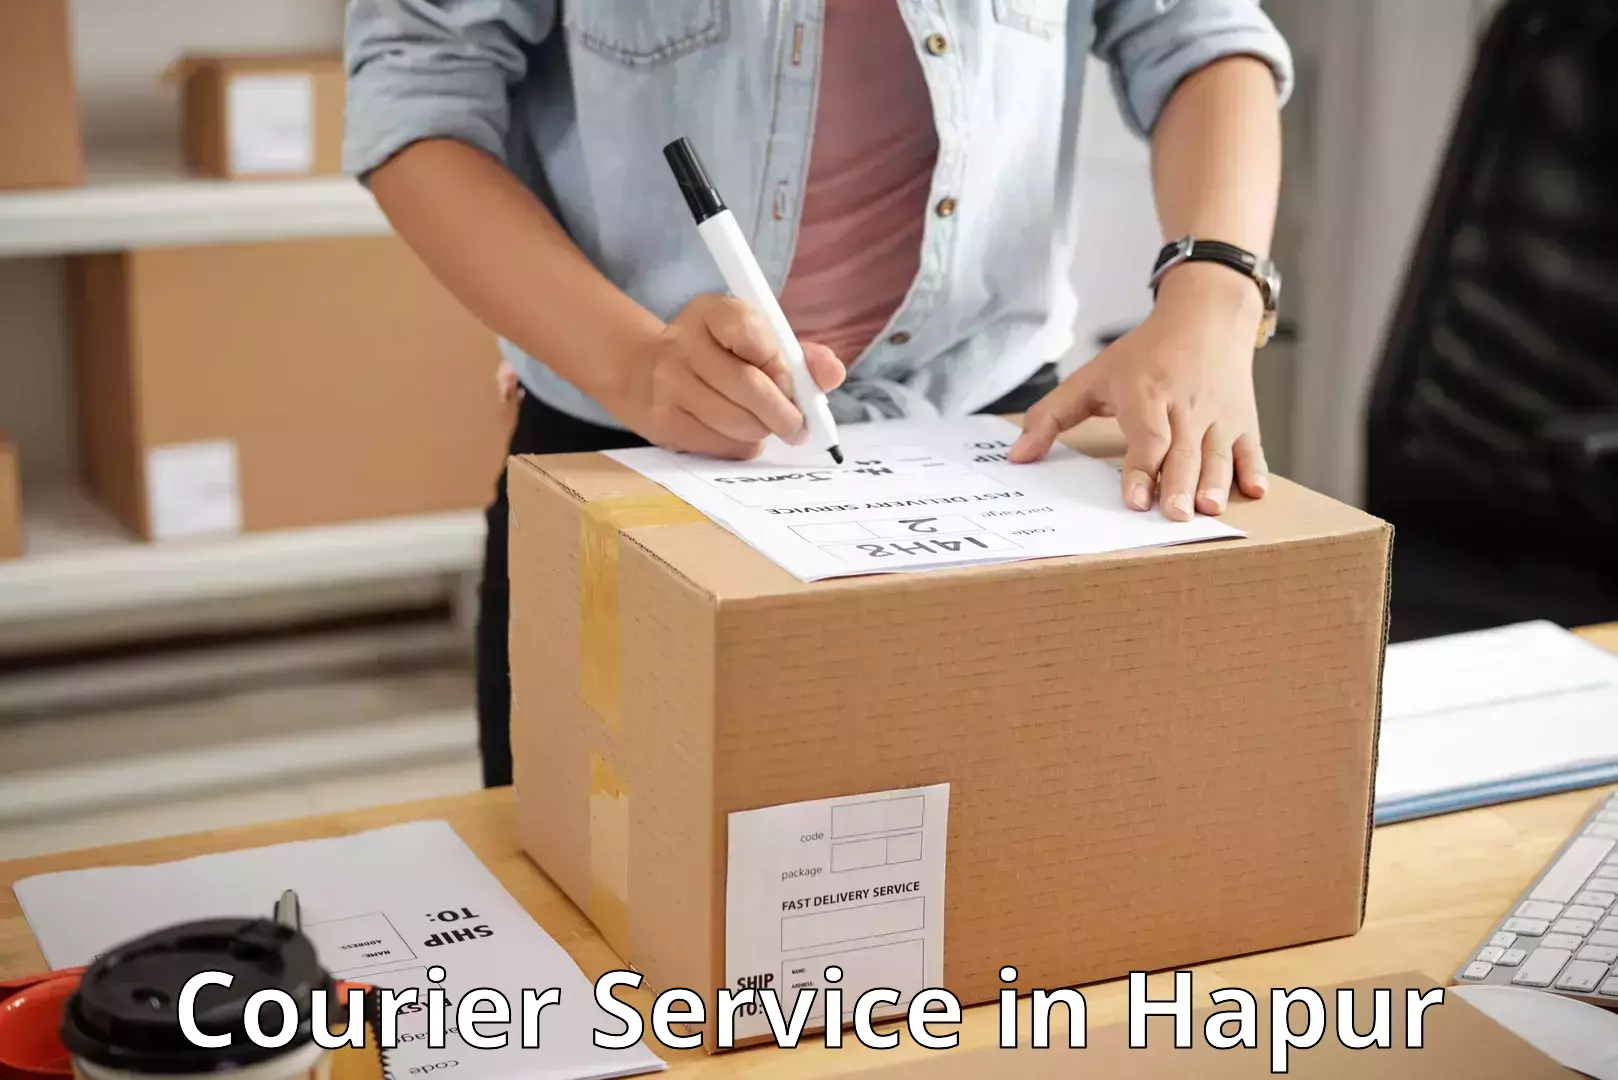 Parcel handling and care in Hapur